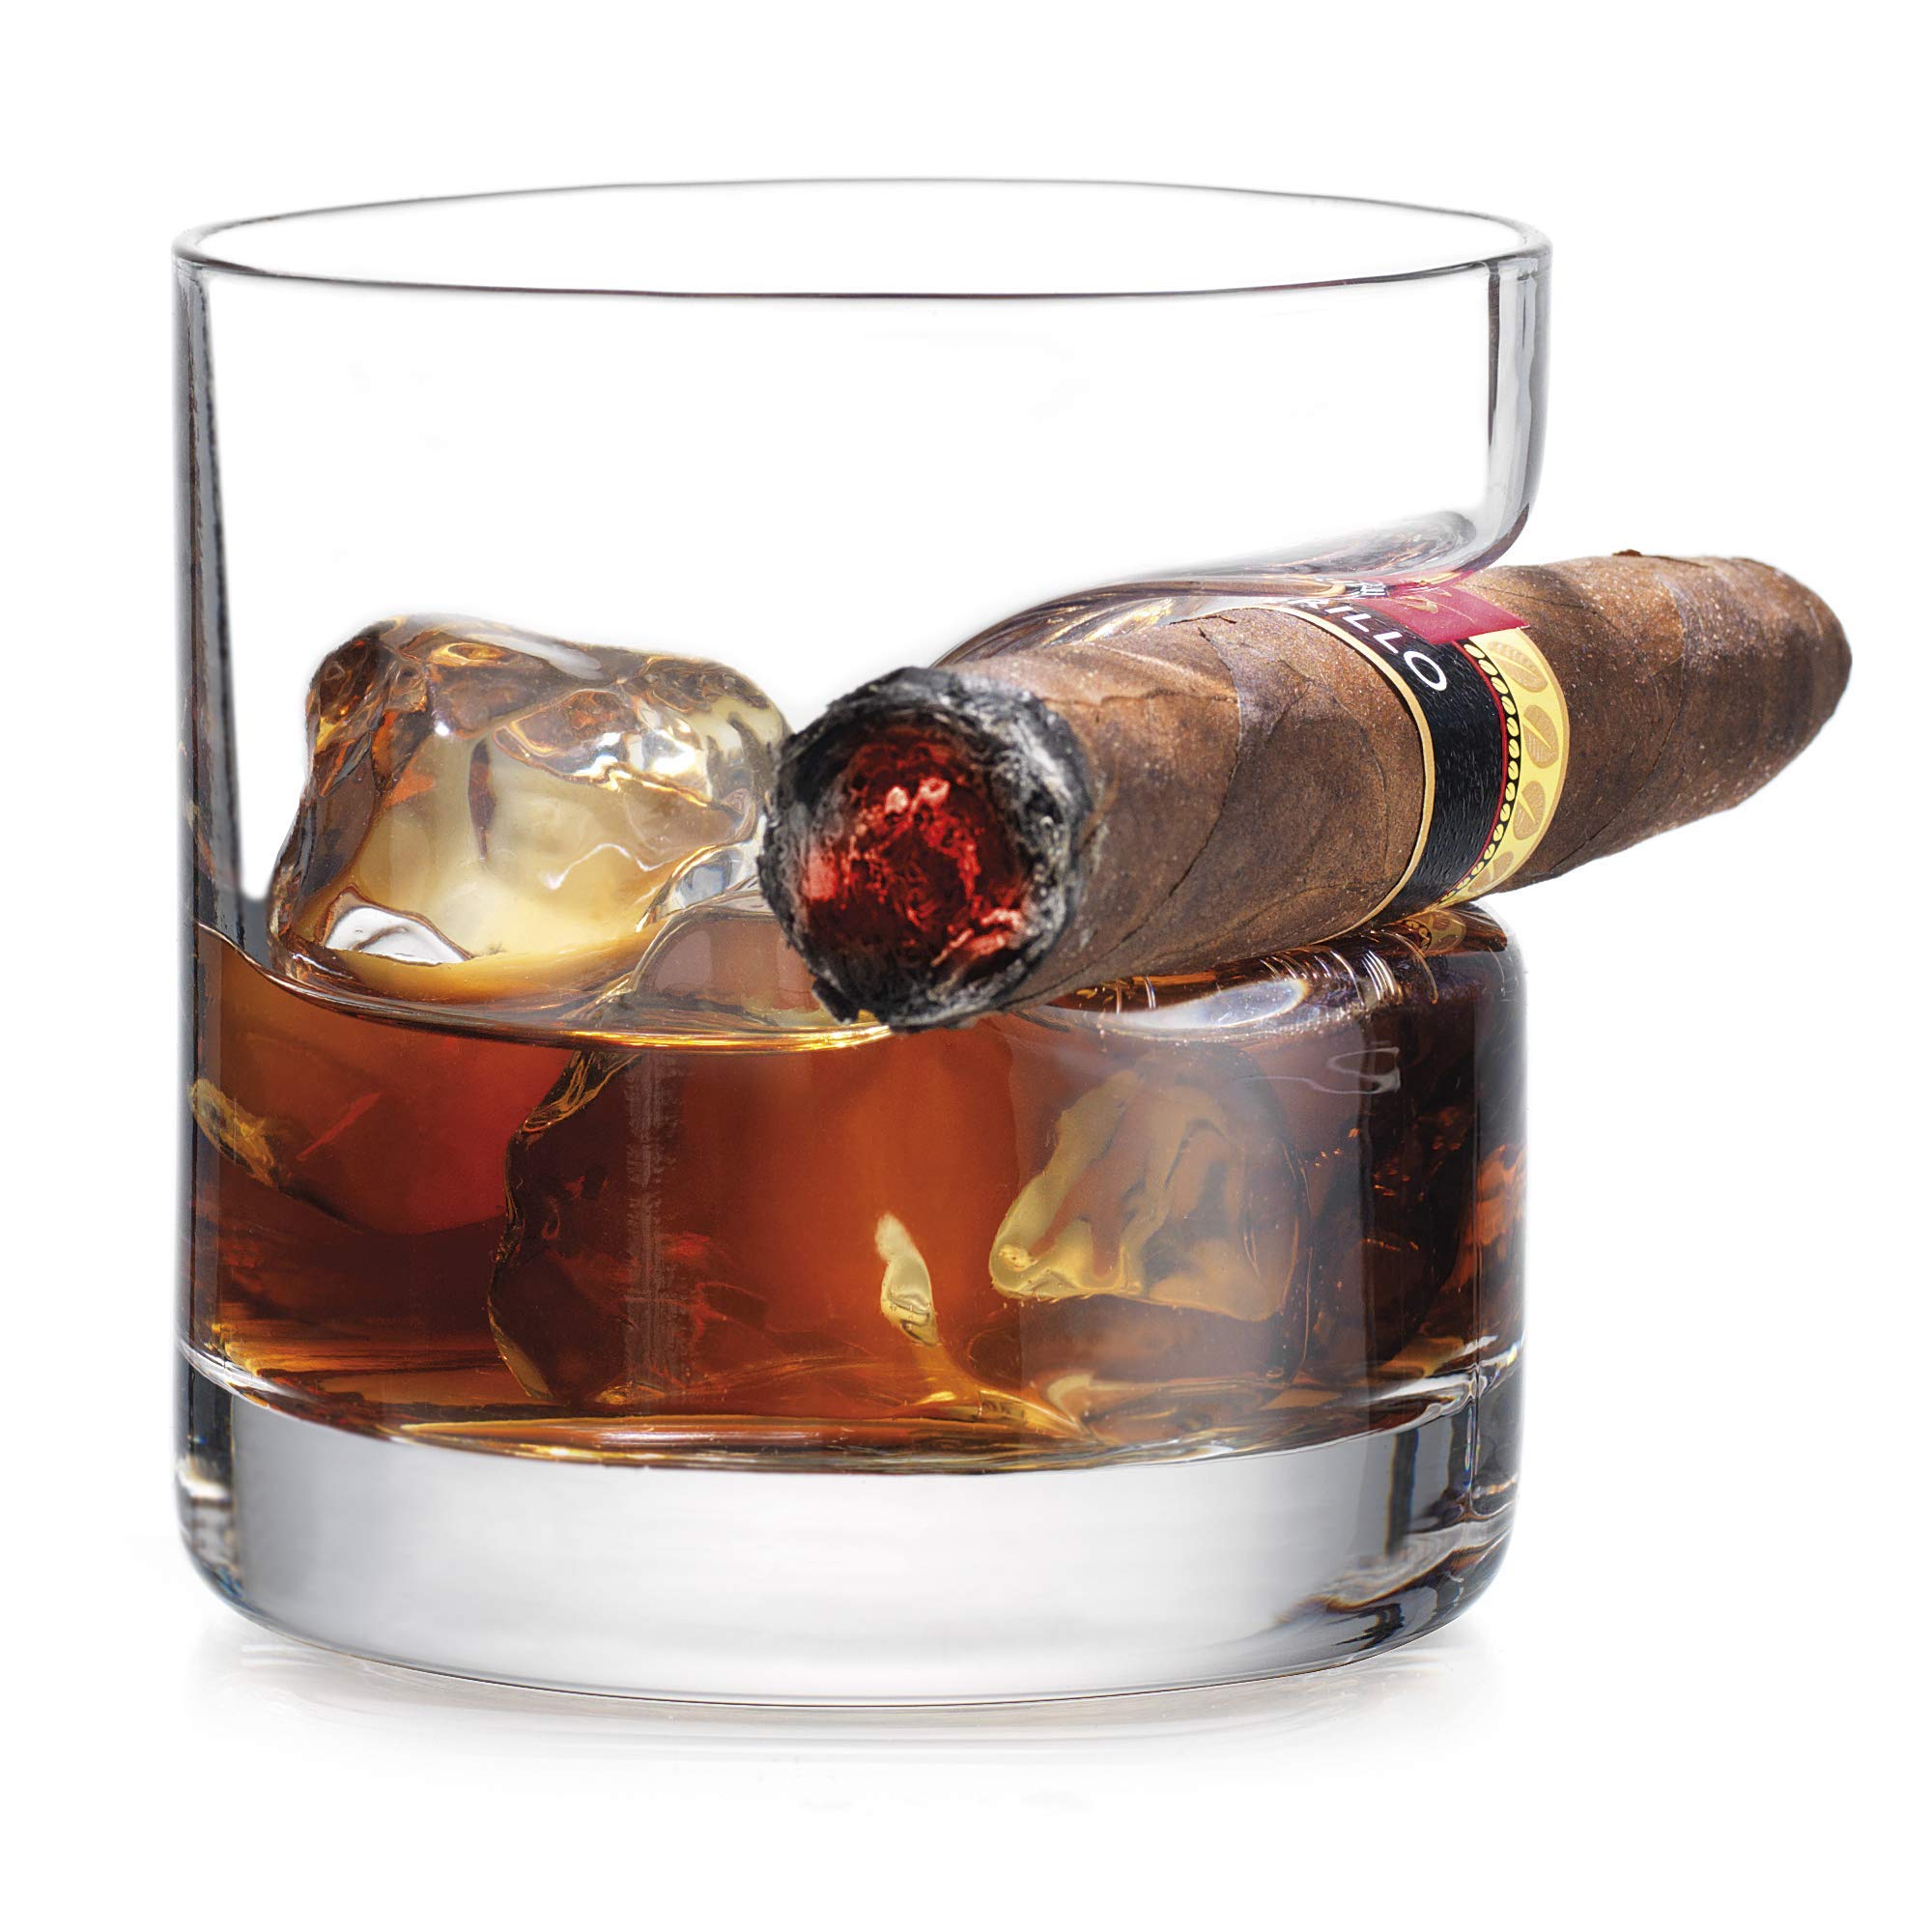 12 oz Cigar Whiskey Glass With Indented Cigar Rest $9.76 w/ Prime Shipping